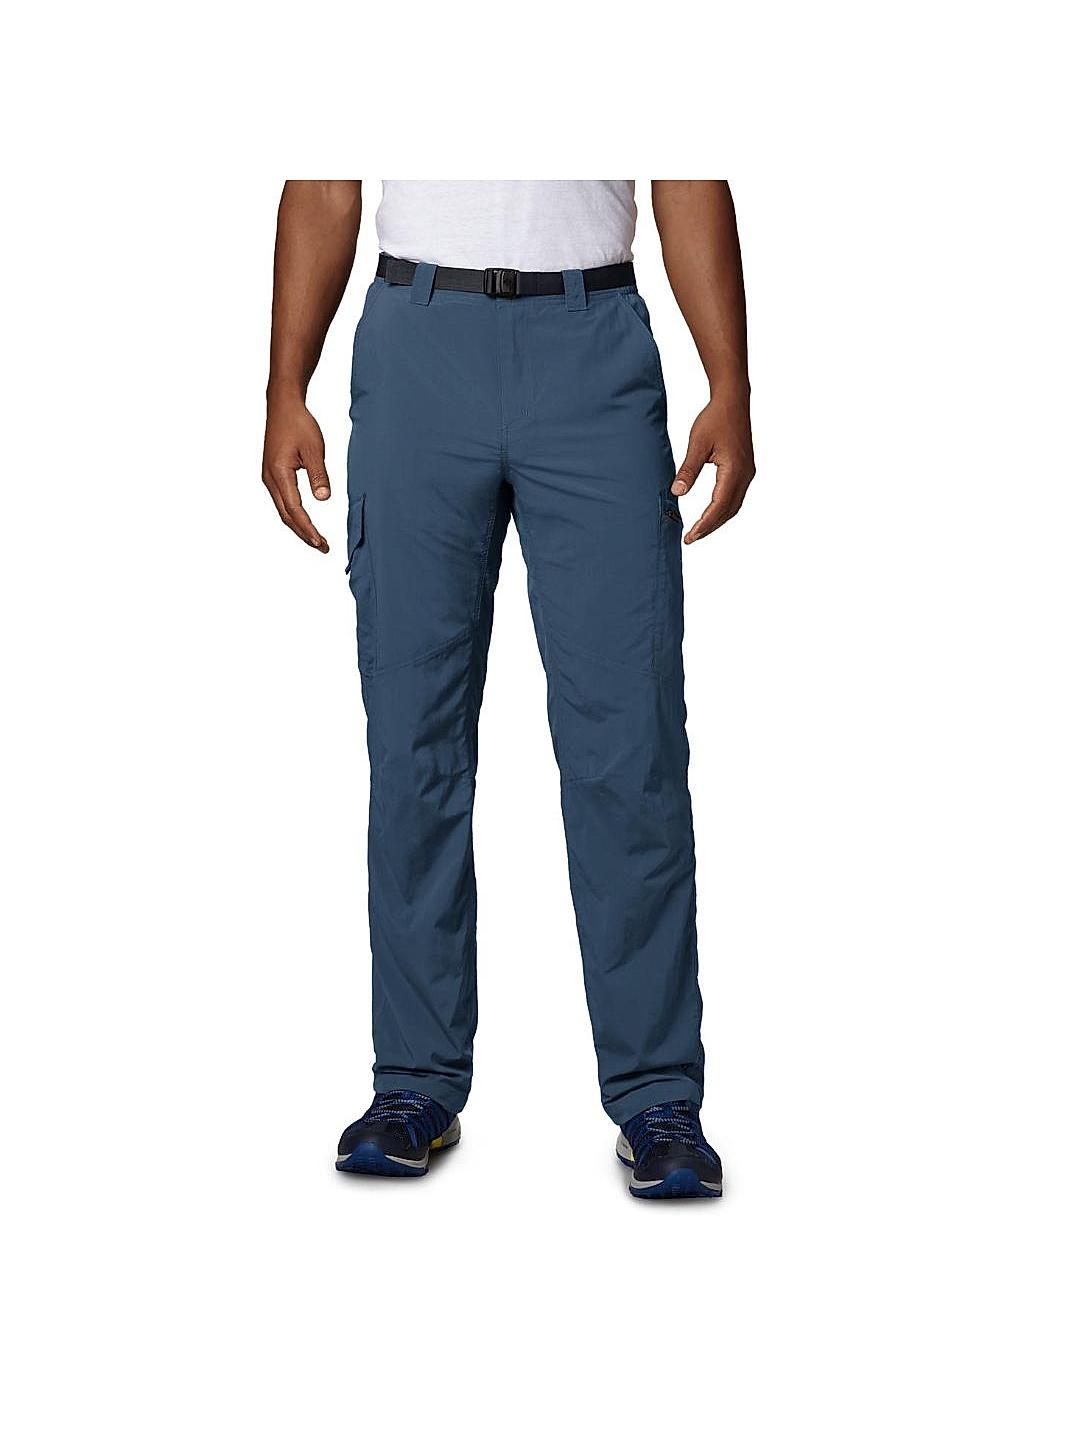 Buy OneTwoTG Mens Premium Solid Color Cargo Pant Relaxed Fit Straight Leg  Cargo Pants at Amazonin